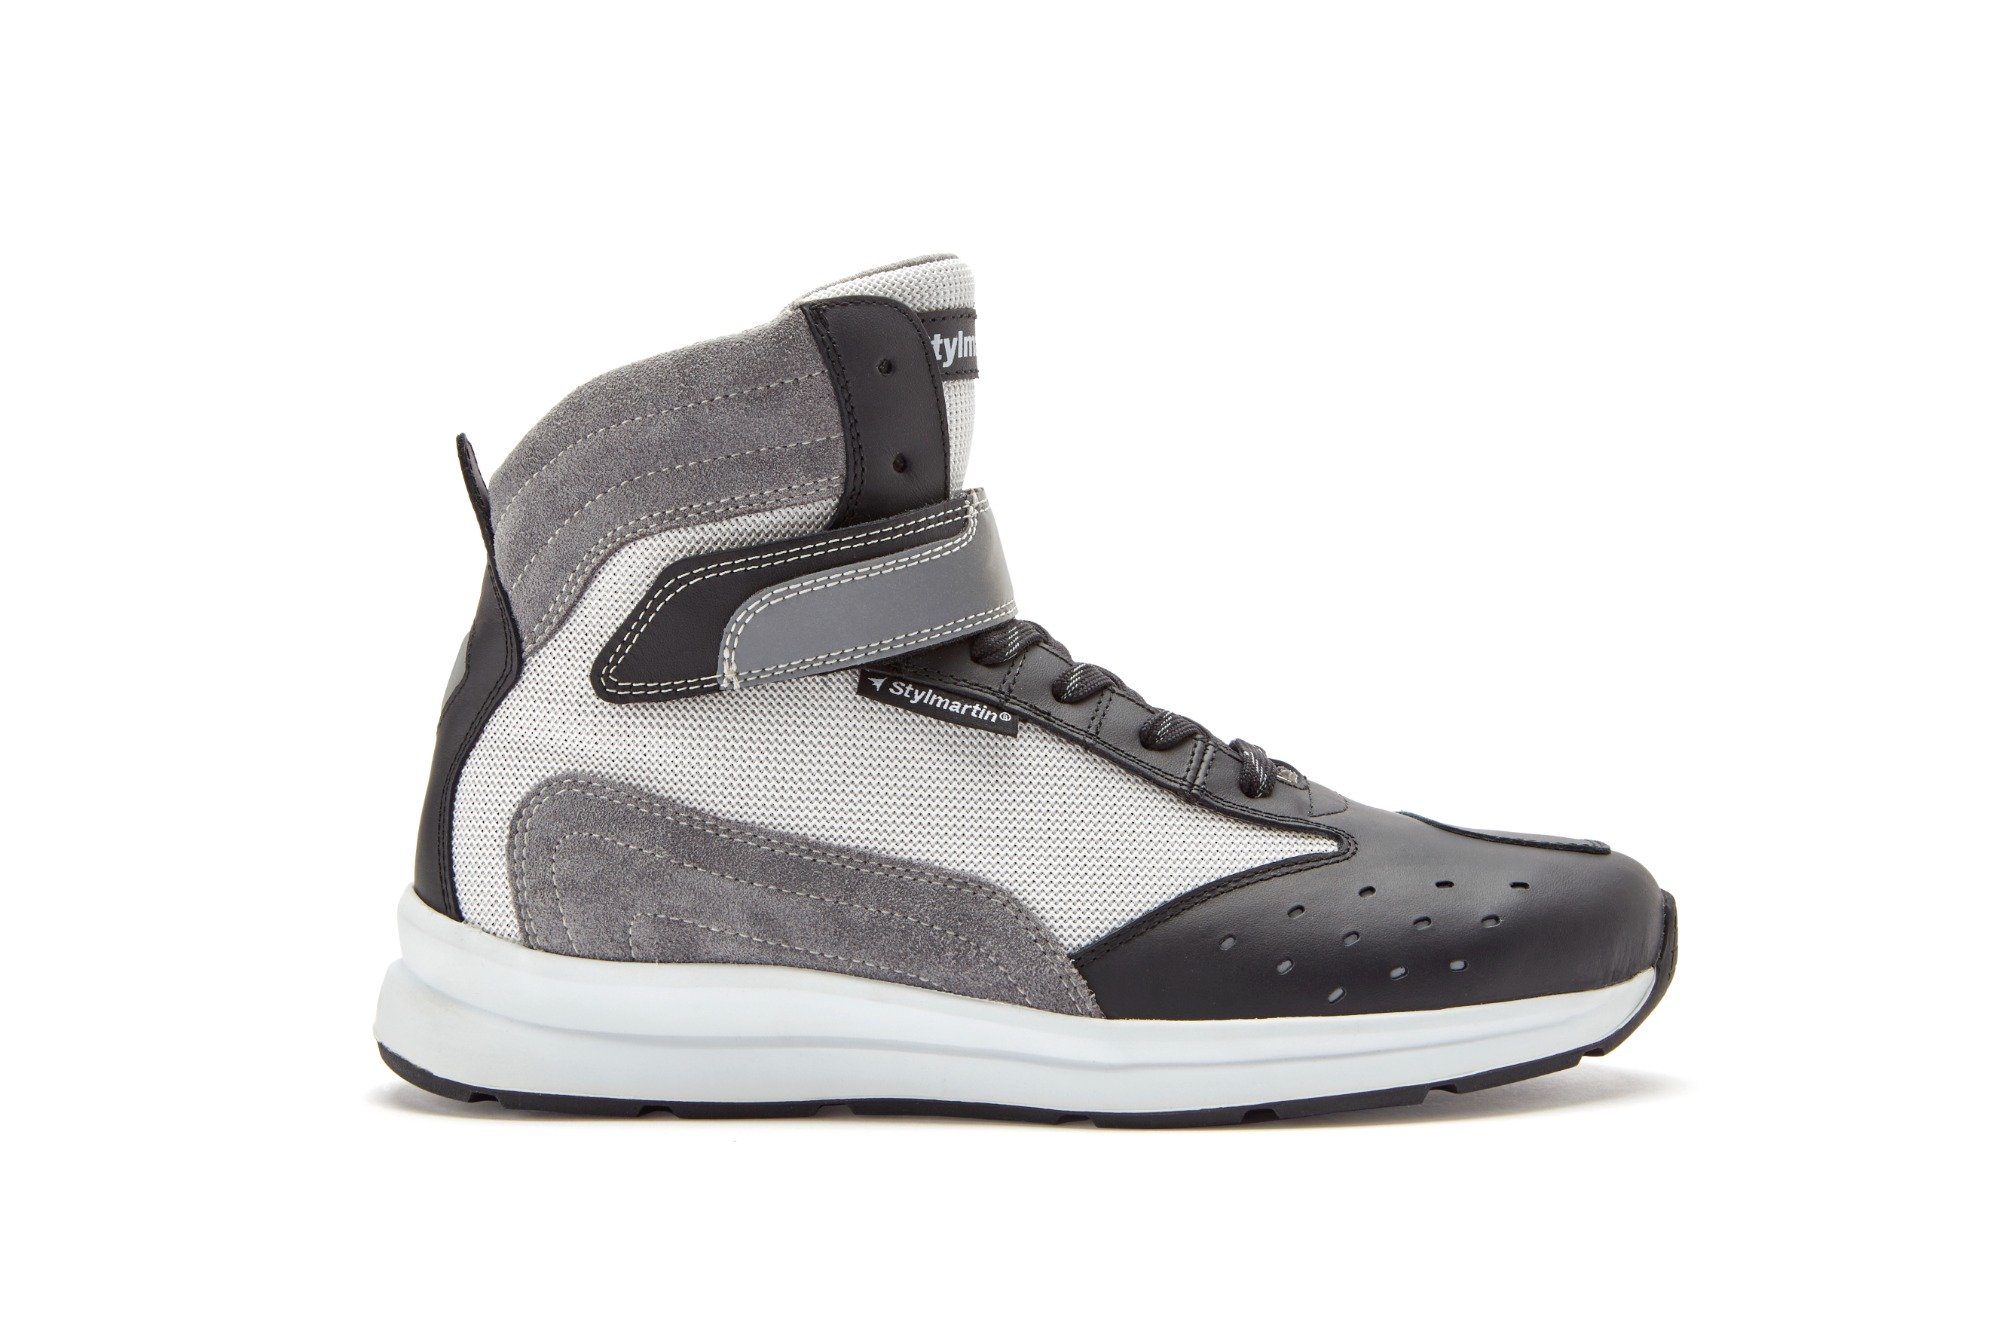 Image of Stylmartin Audax Air Black Anthracite White Size 41 ID 1000001309330